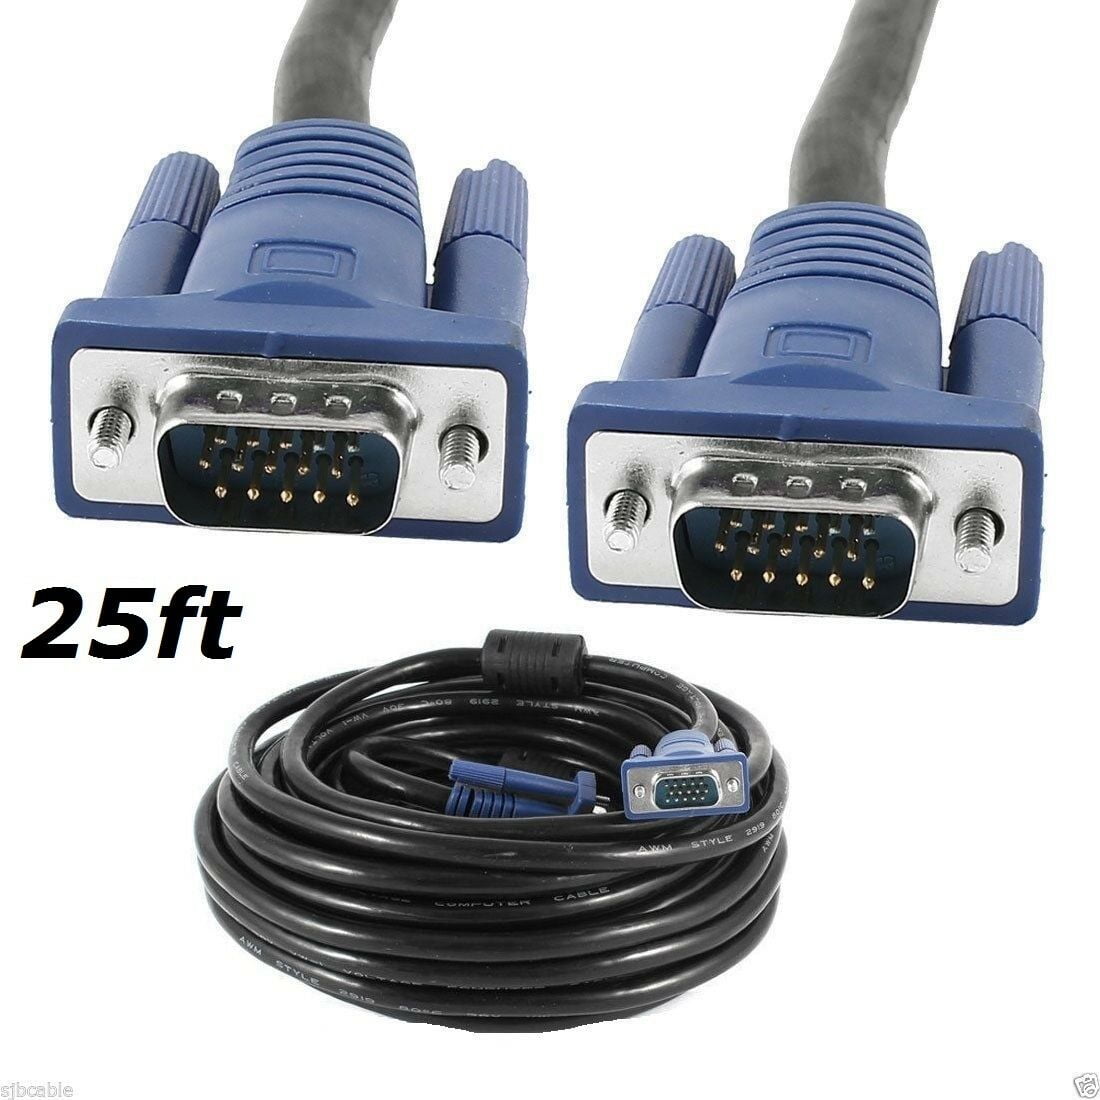 VGA Lead cable for Computer Laptop Monitor TV LCD Video pc Male to Male SVGA 